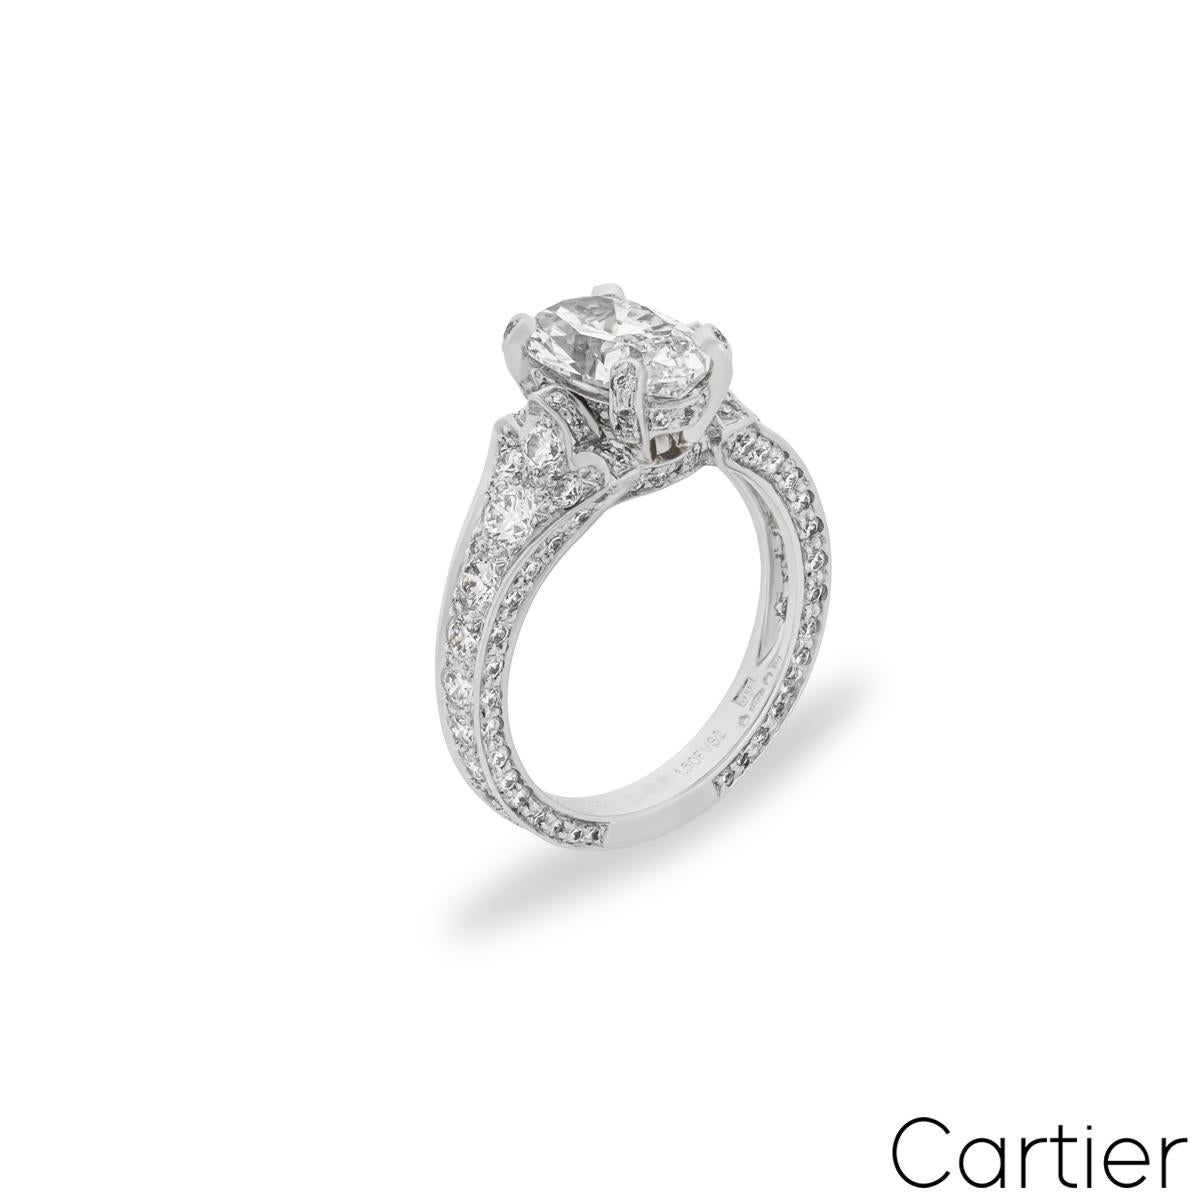 A magnificent platinum diamond engagement ring by Cartier from the Camelia collection. Adorning the centre in an elaborate diamond set four prong mount is an oval cut diamond weighing 1.50ct, F colour and VS2 clarity. Accentuating the centre stone